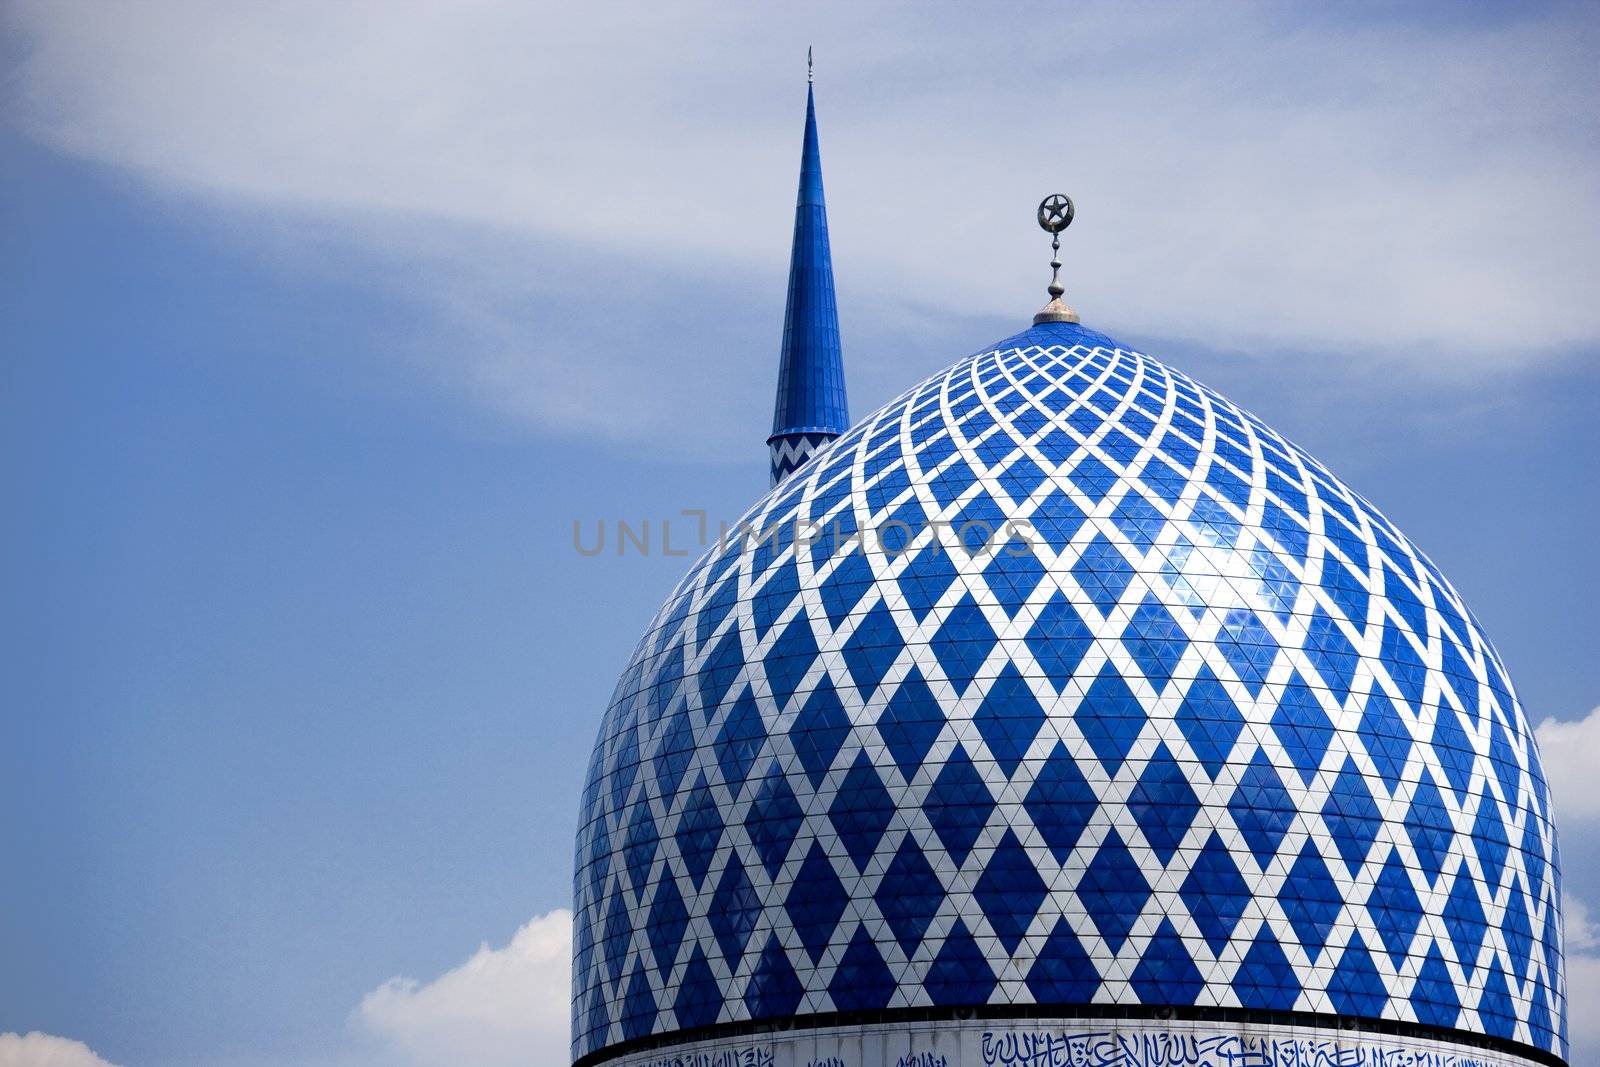 Dome of the Sultan Salahuddin Abdul Aziz Shah Mosque or commonly known as the Blue Mosque, located at Shah Alam, Selangor, Malaysia.